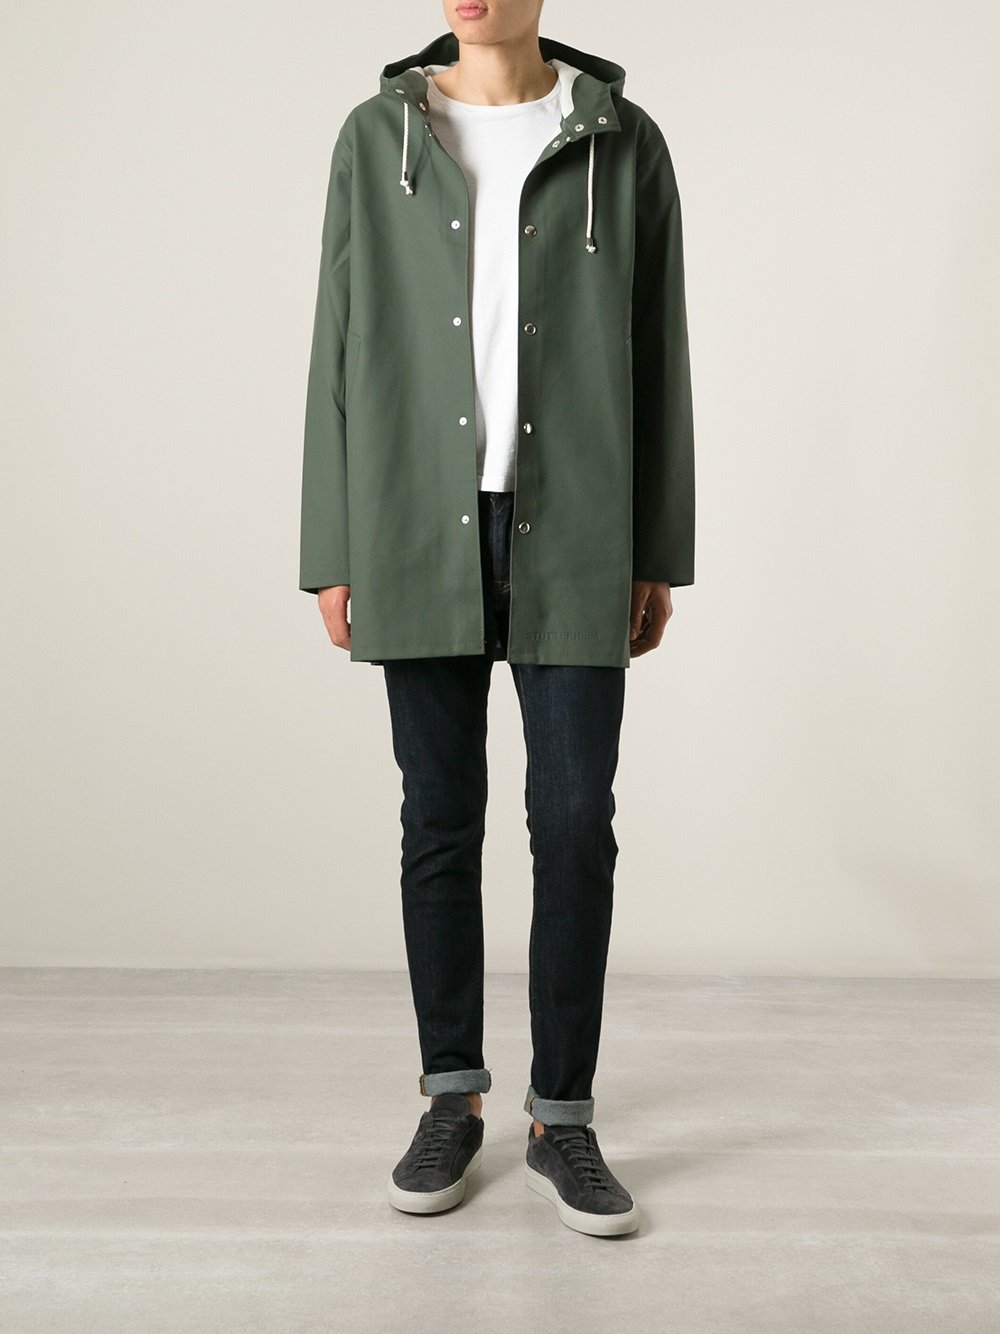 5 of the Best...Men's Raincoats for Spring Showers